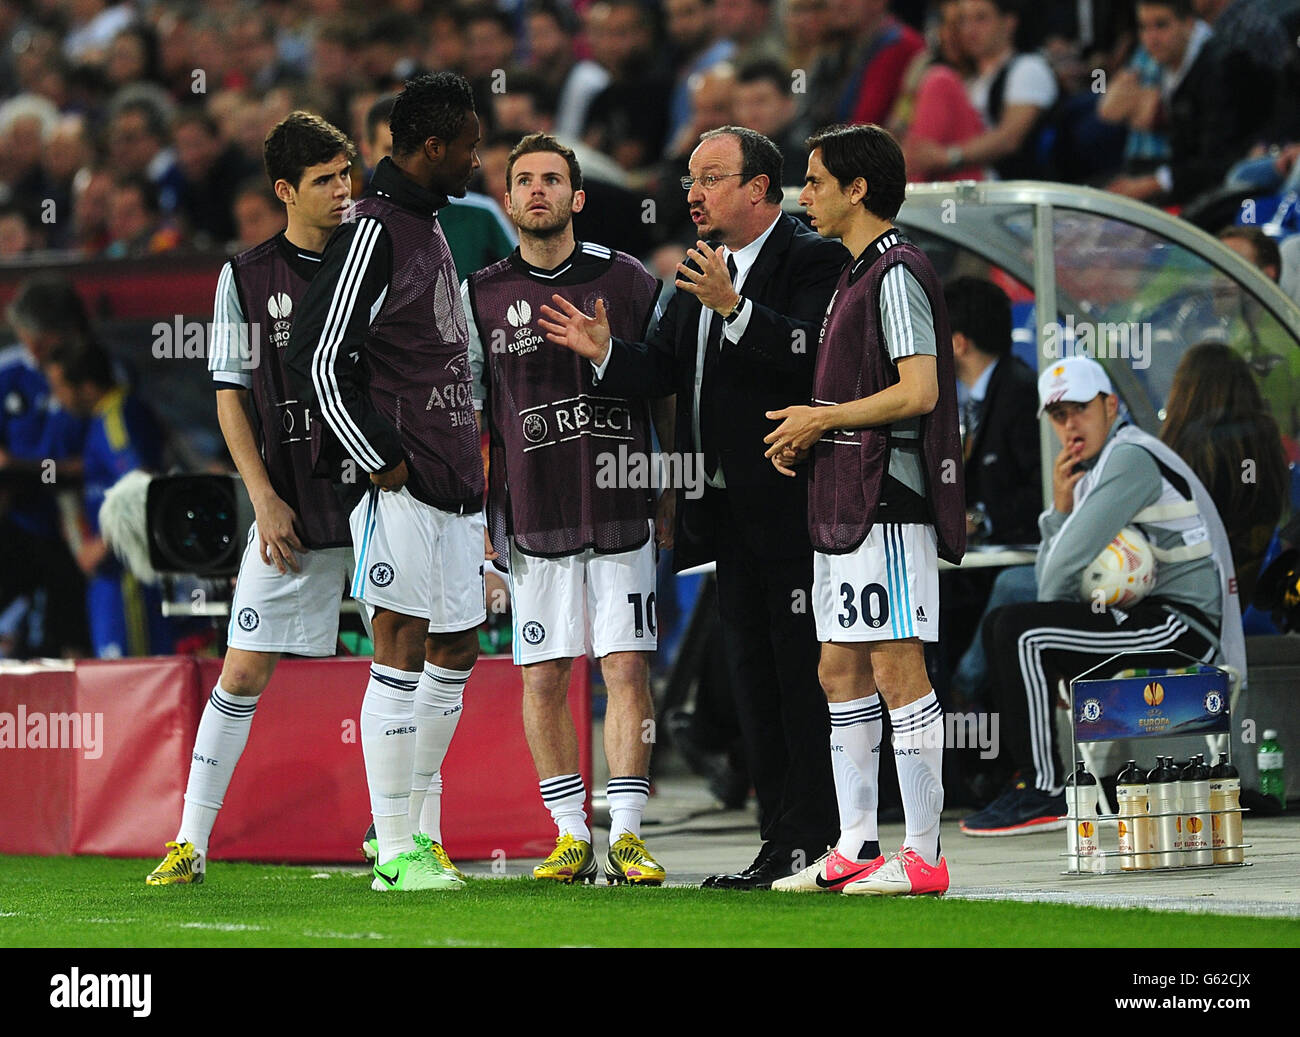 Chelsea's interim manager Rafael Benitez talks to his substitutes as they warm up Stock Photo